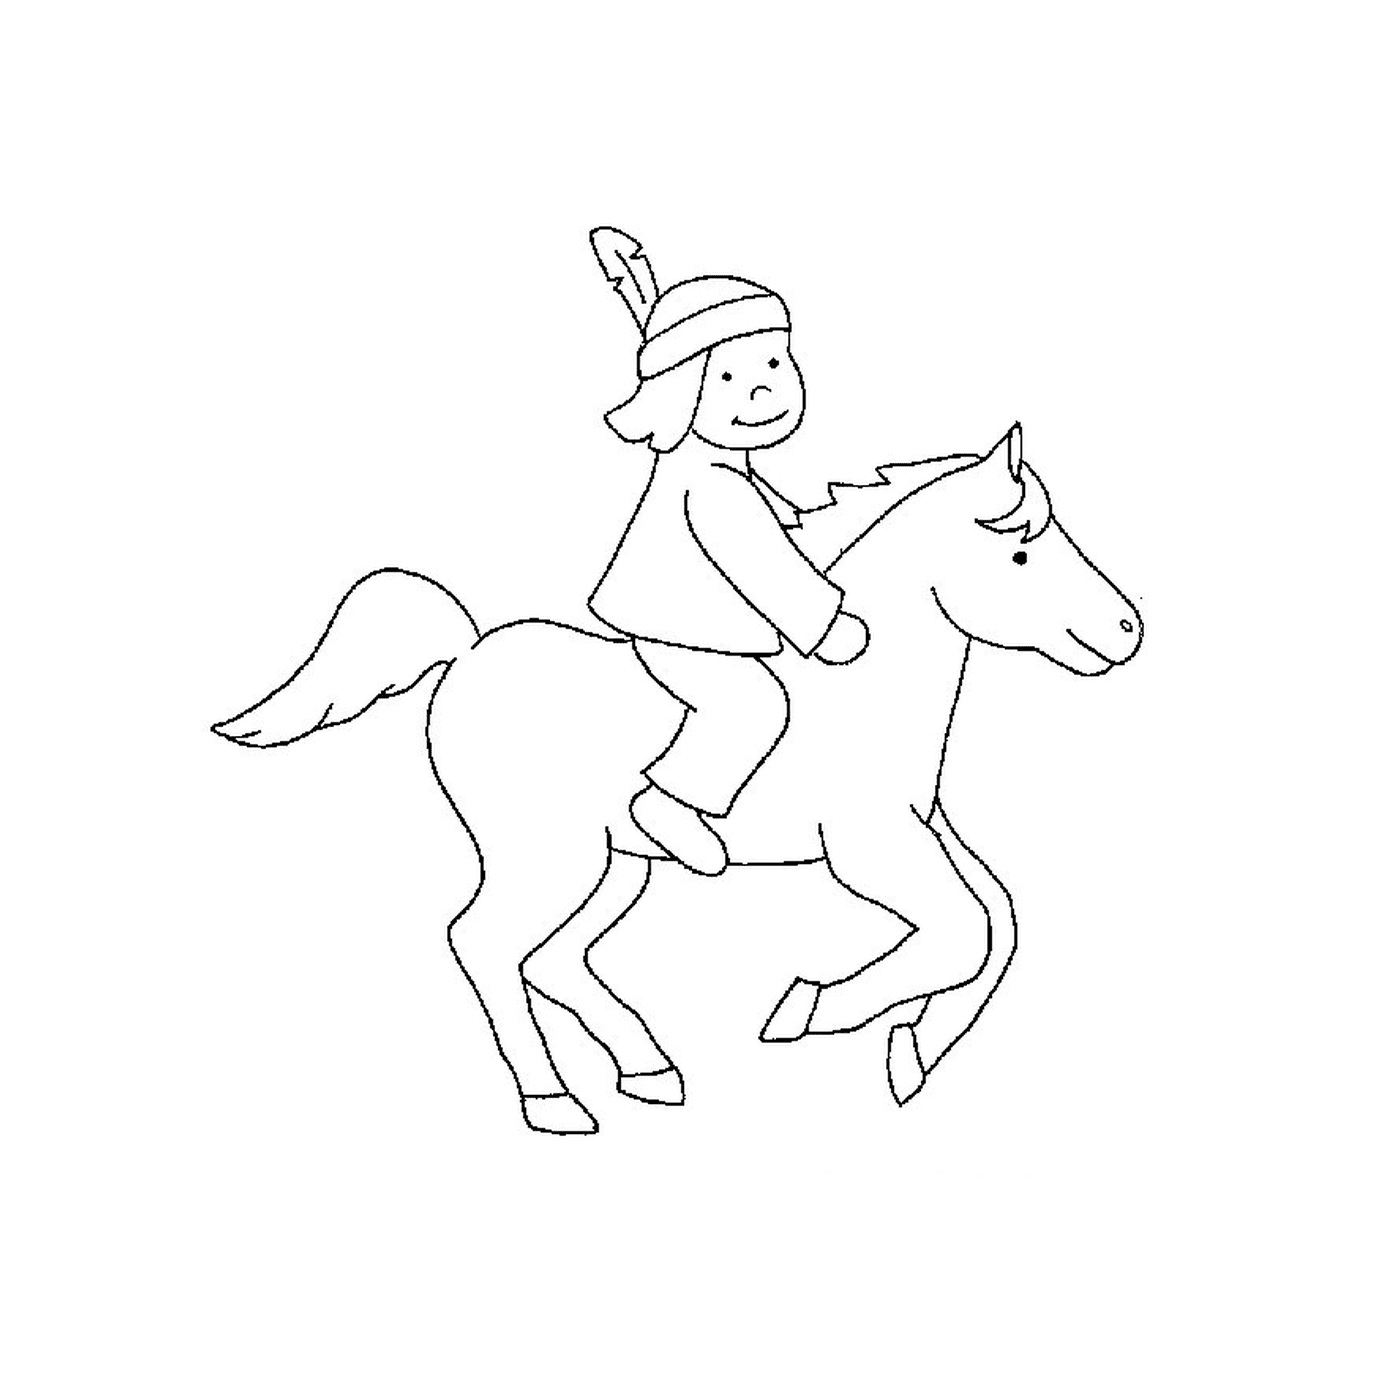  Indian on horseback - A person rides a horse 